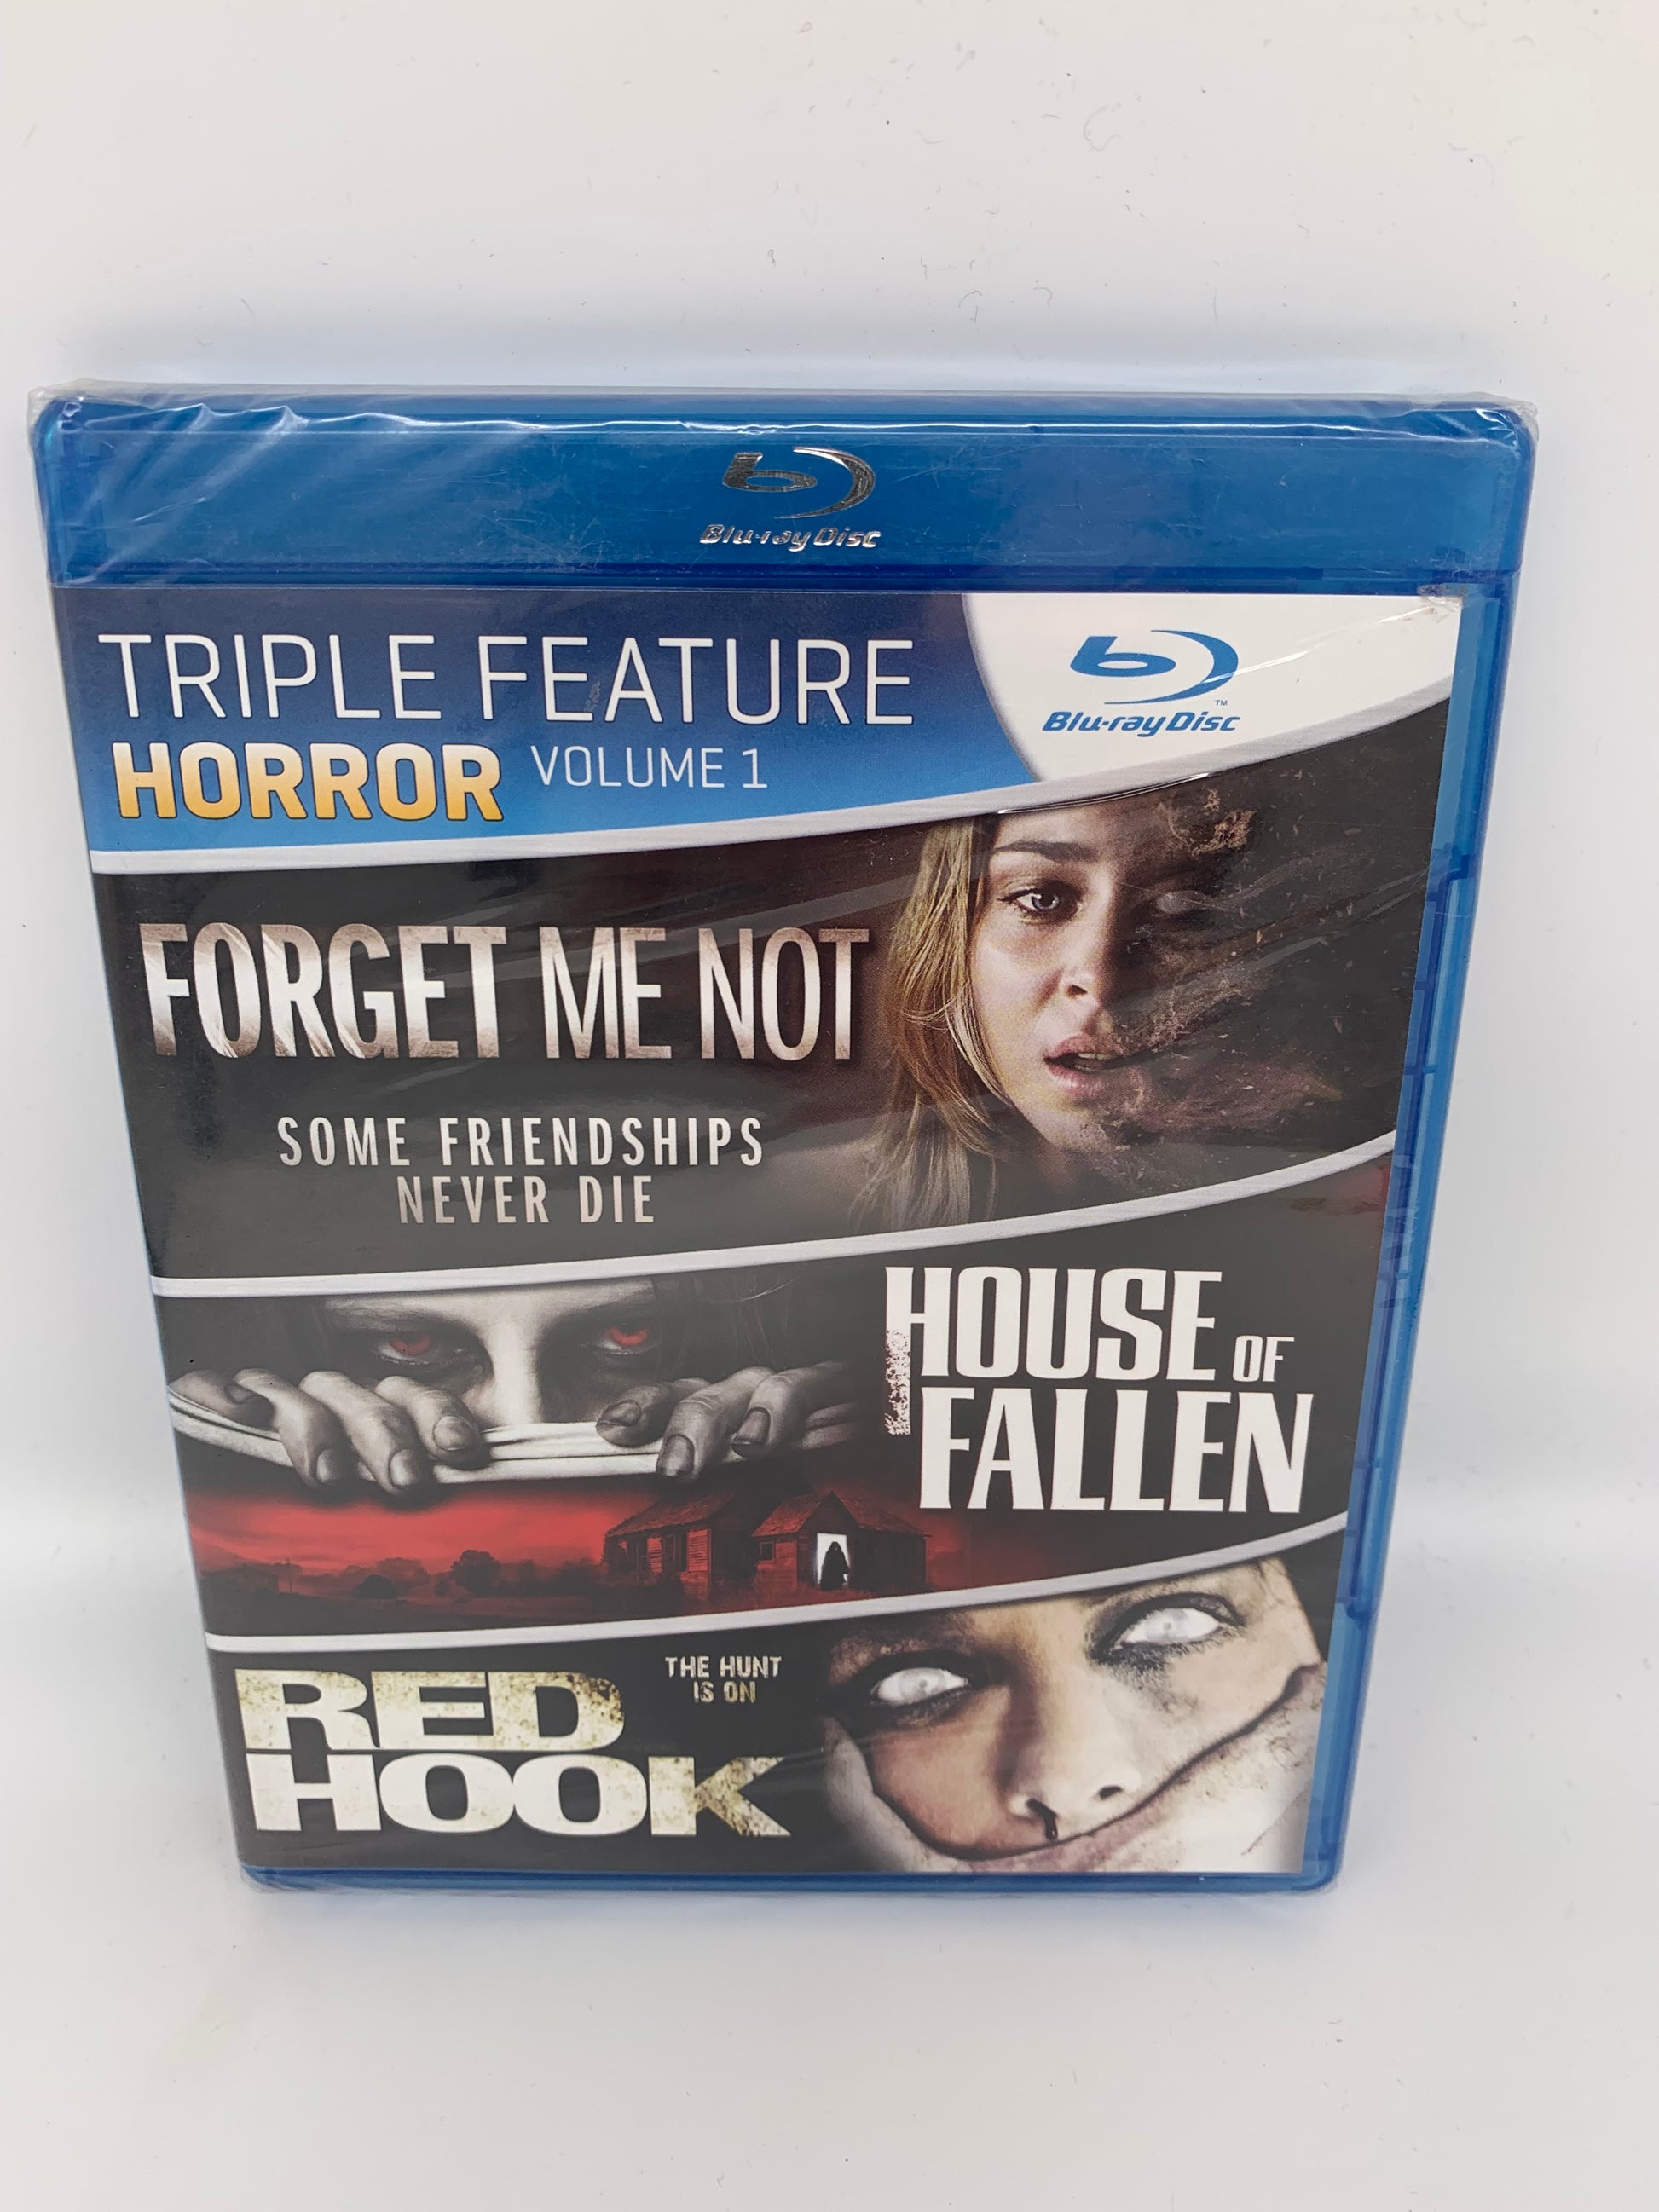 FiLM BLU-RAY, FORGET ME NOT & HOUSE OF FALLEN & RED HOOK